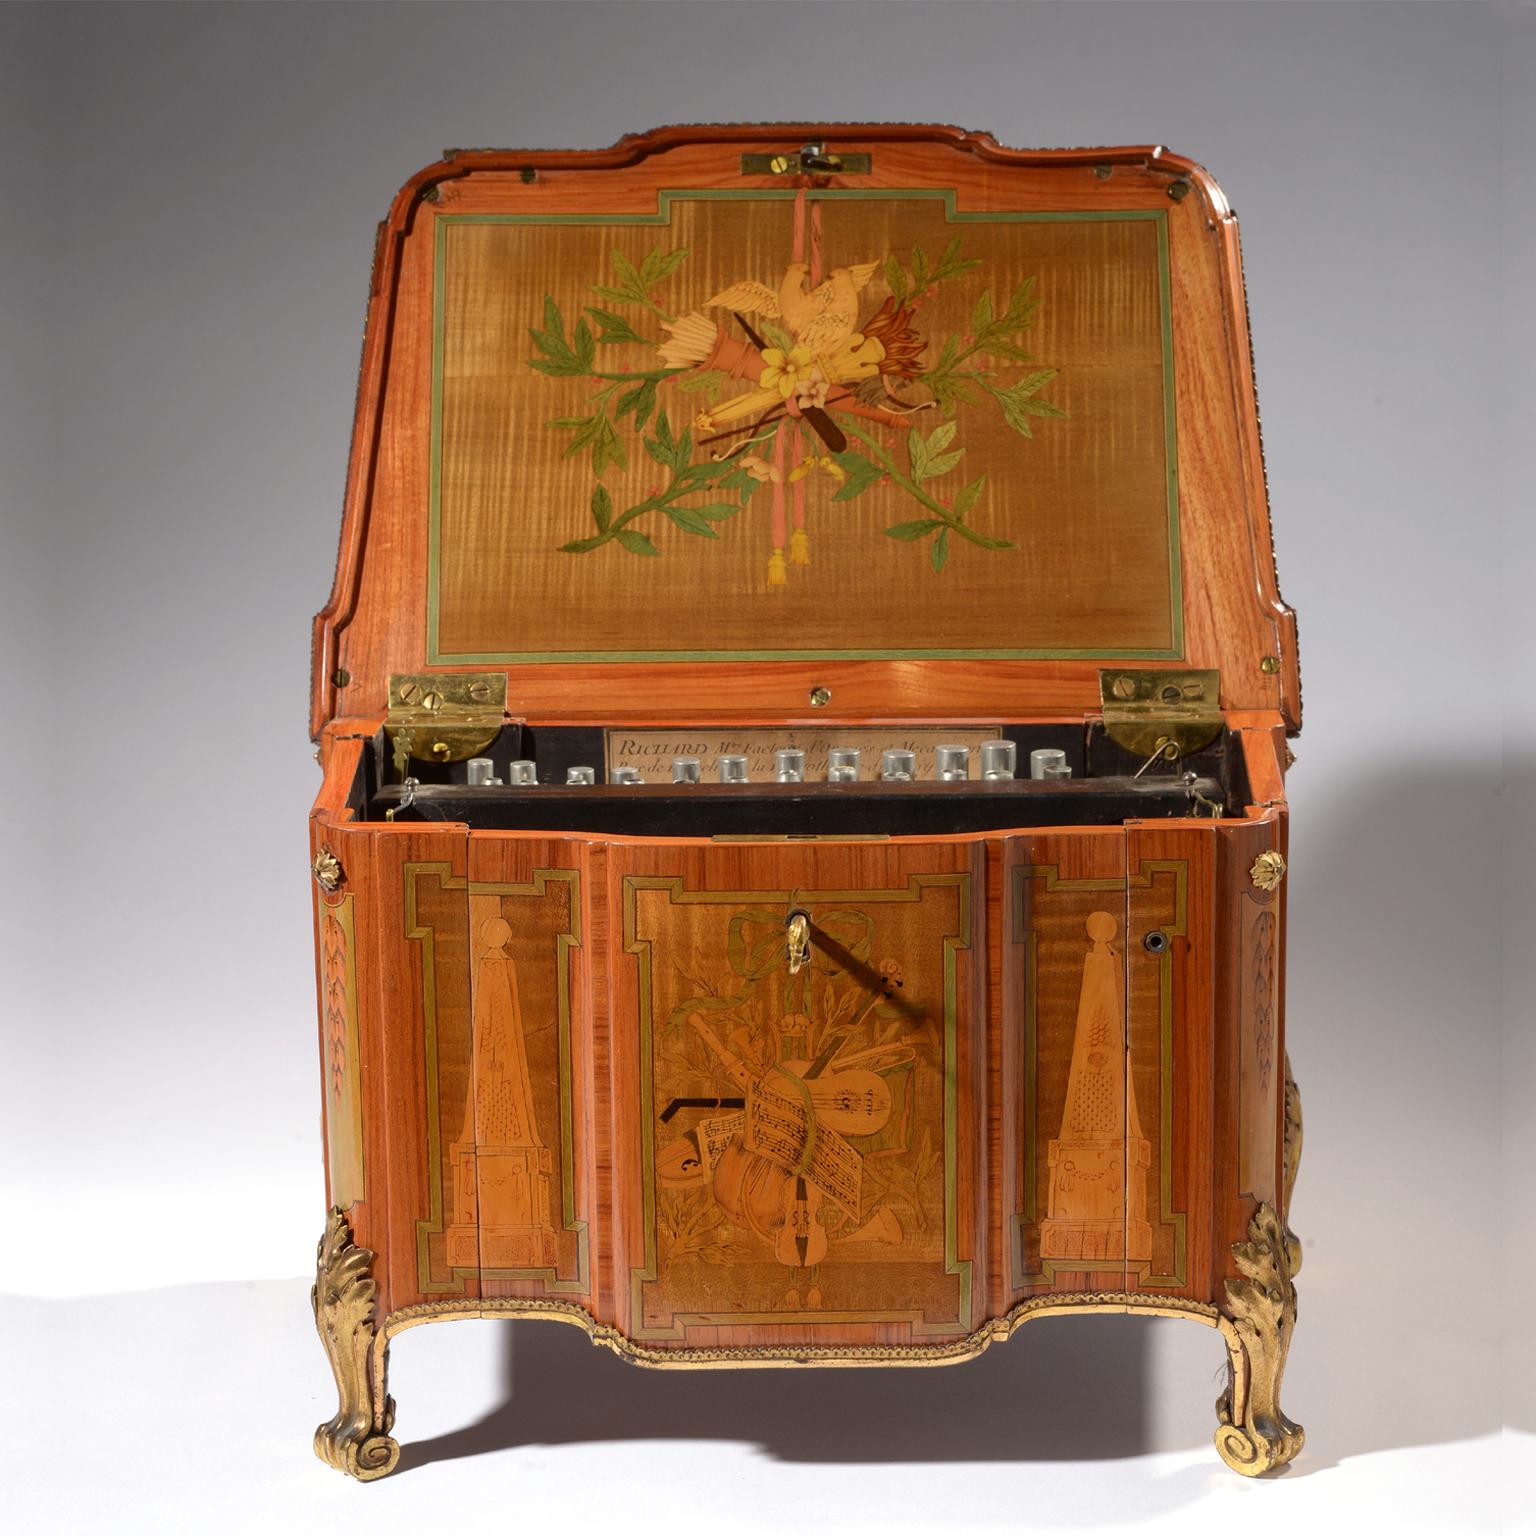 A very rare Louis XVI period serinette or bird organ in the form of a transitional style gilt bronze mounted and marquetry inlaid miniature commode in the manner of gilbert, by Robert Richard, Paris.

With a label for ' RICHARD - maitre facteur